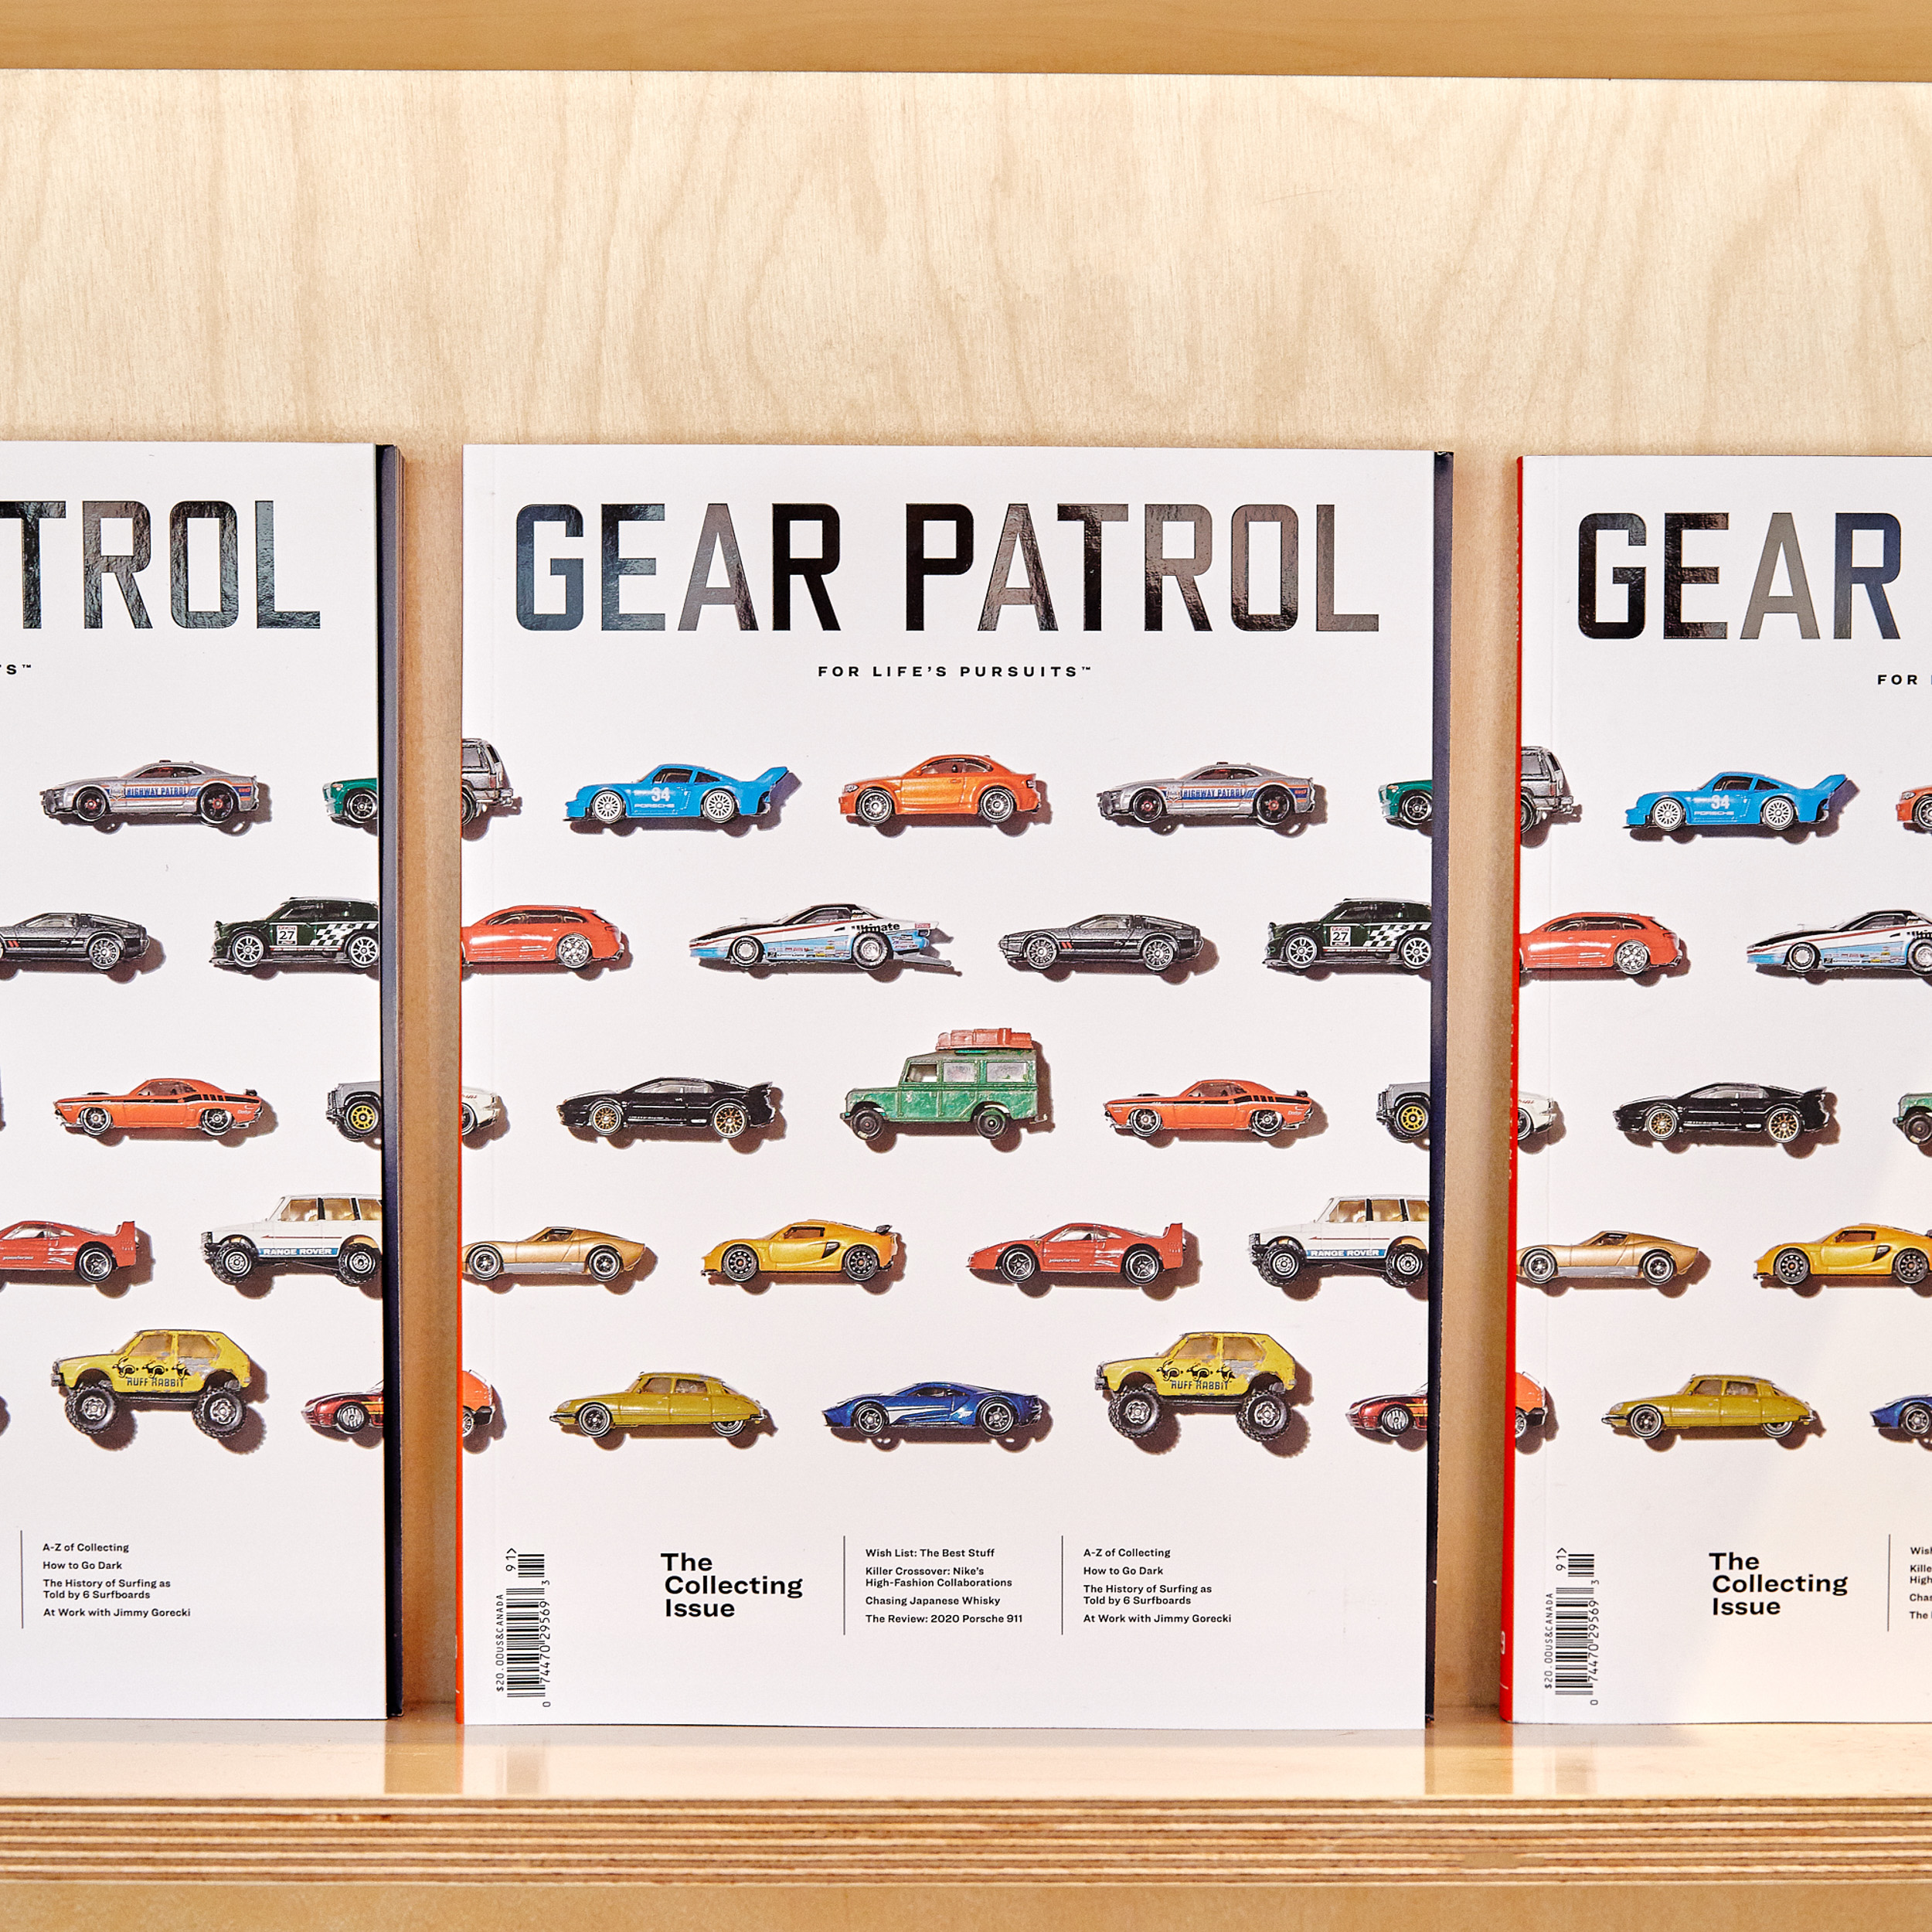 Cover images of Gear Patrol publications